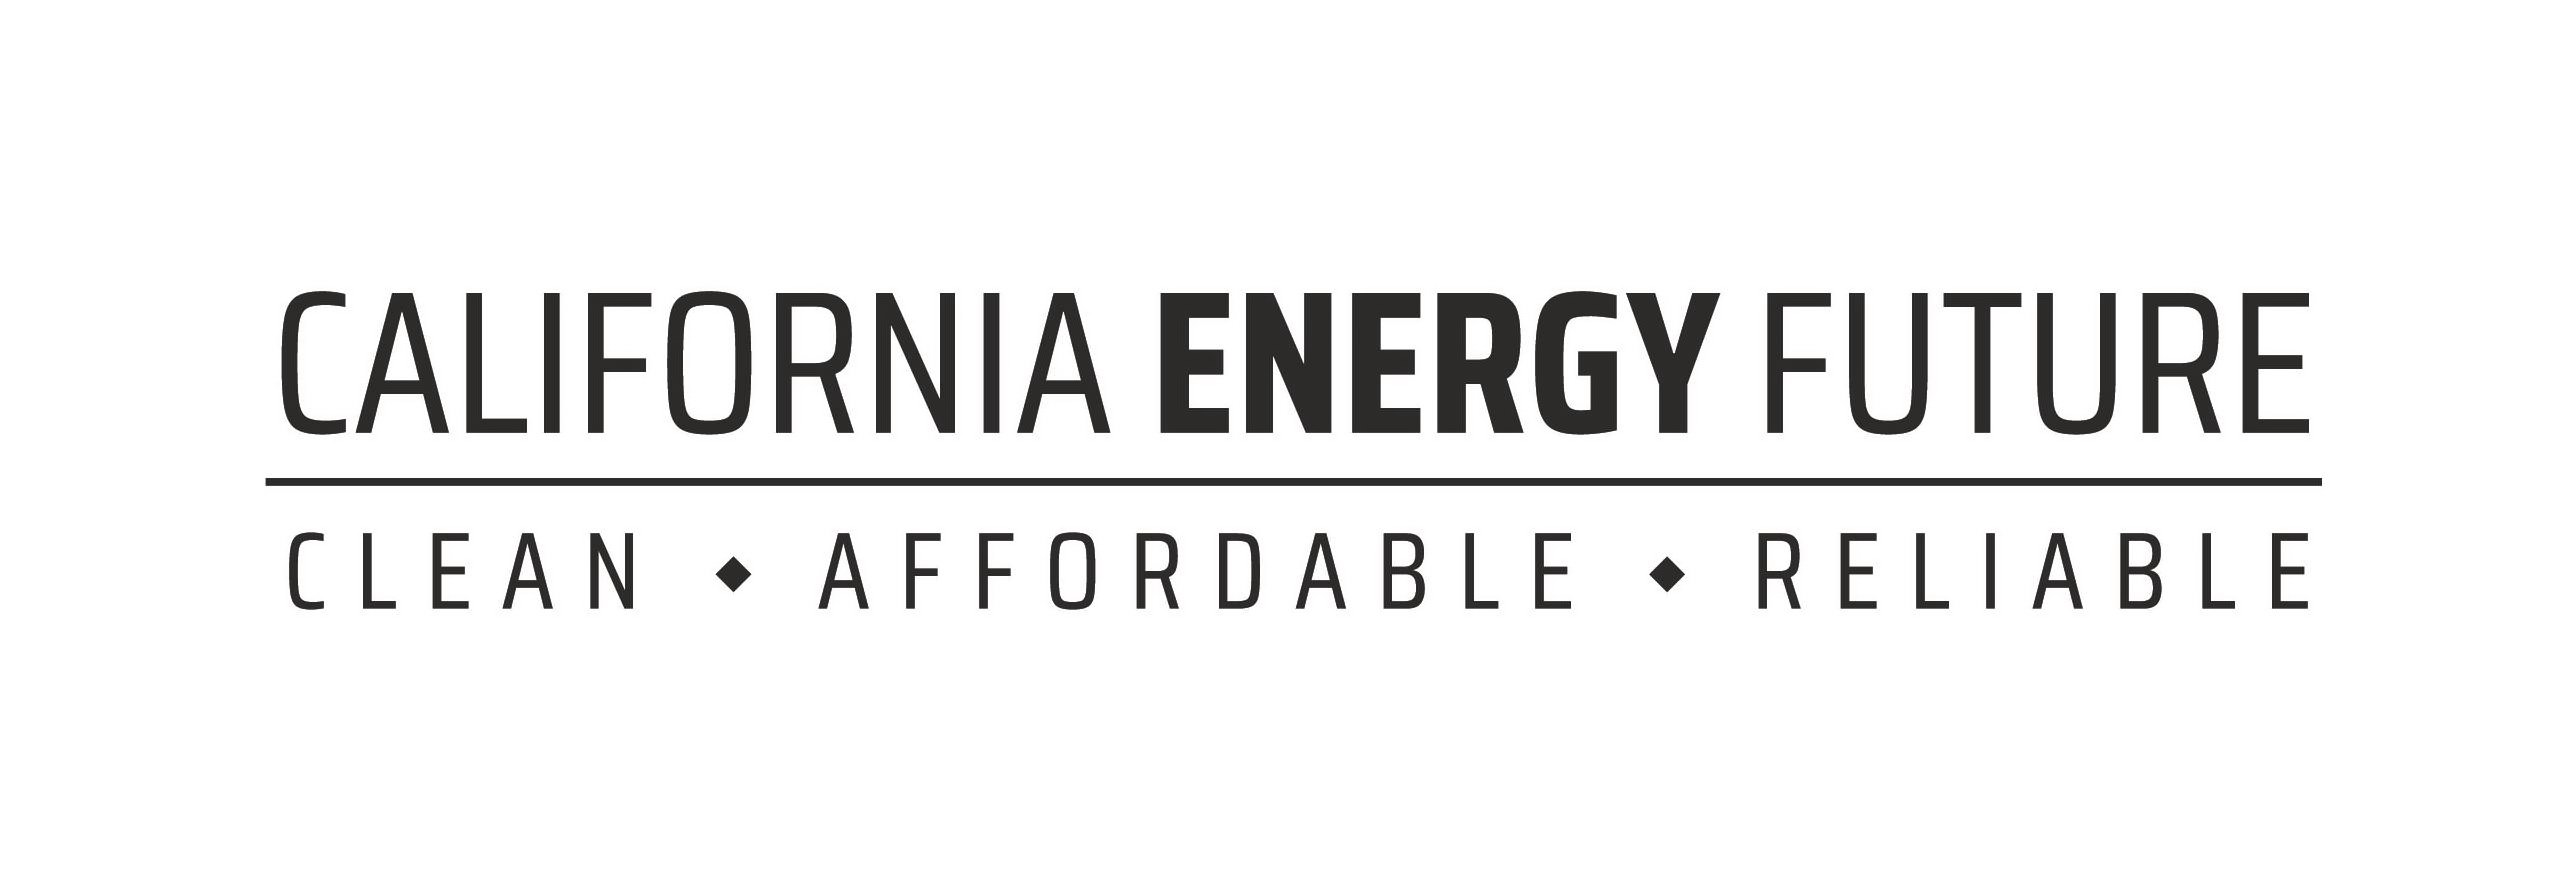  CALIFORNIA ENERGY FUTURE CLEAN AFFORDABLE RELIABLE